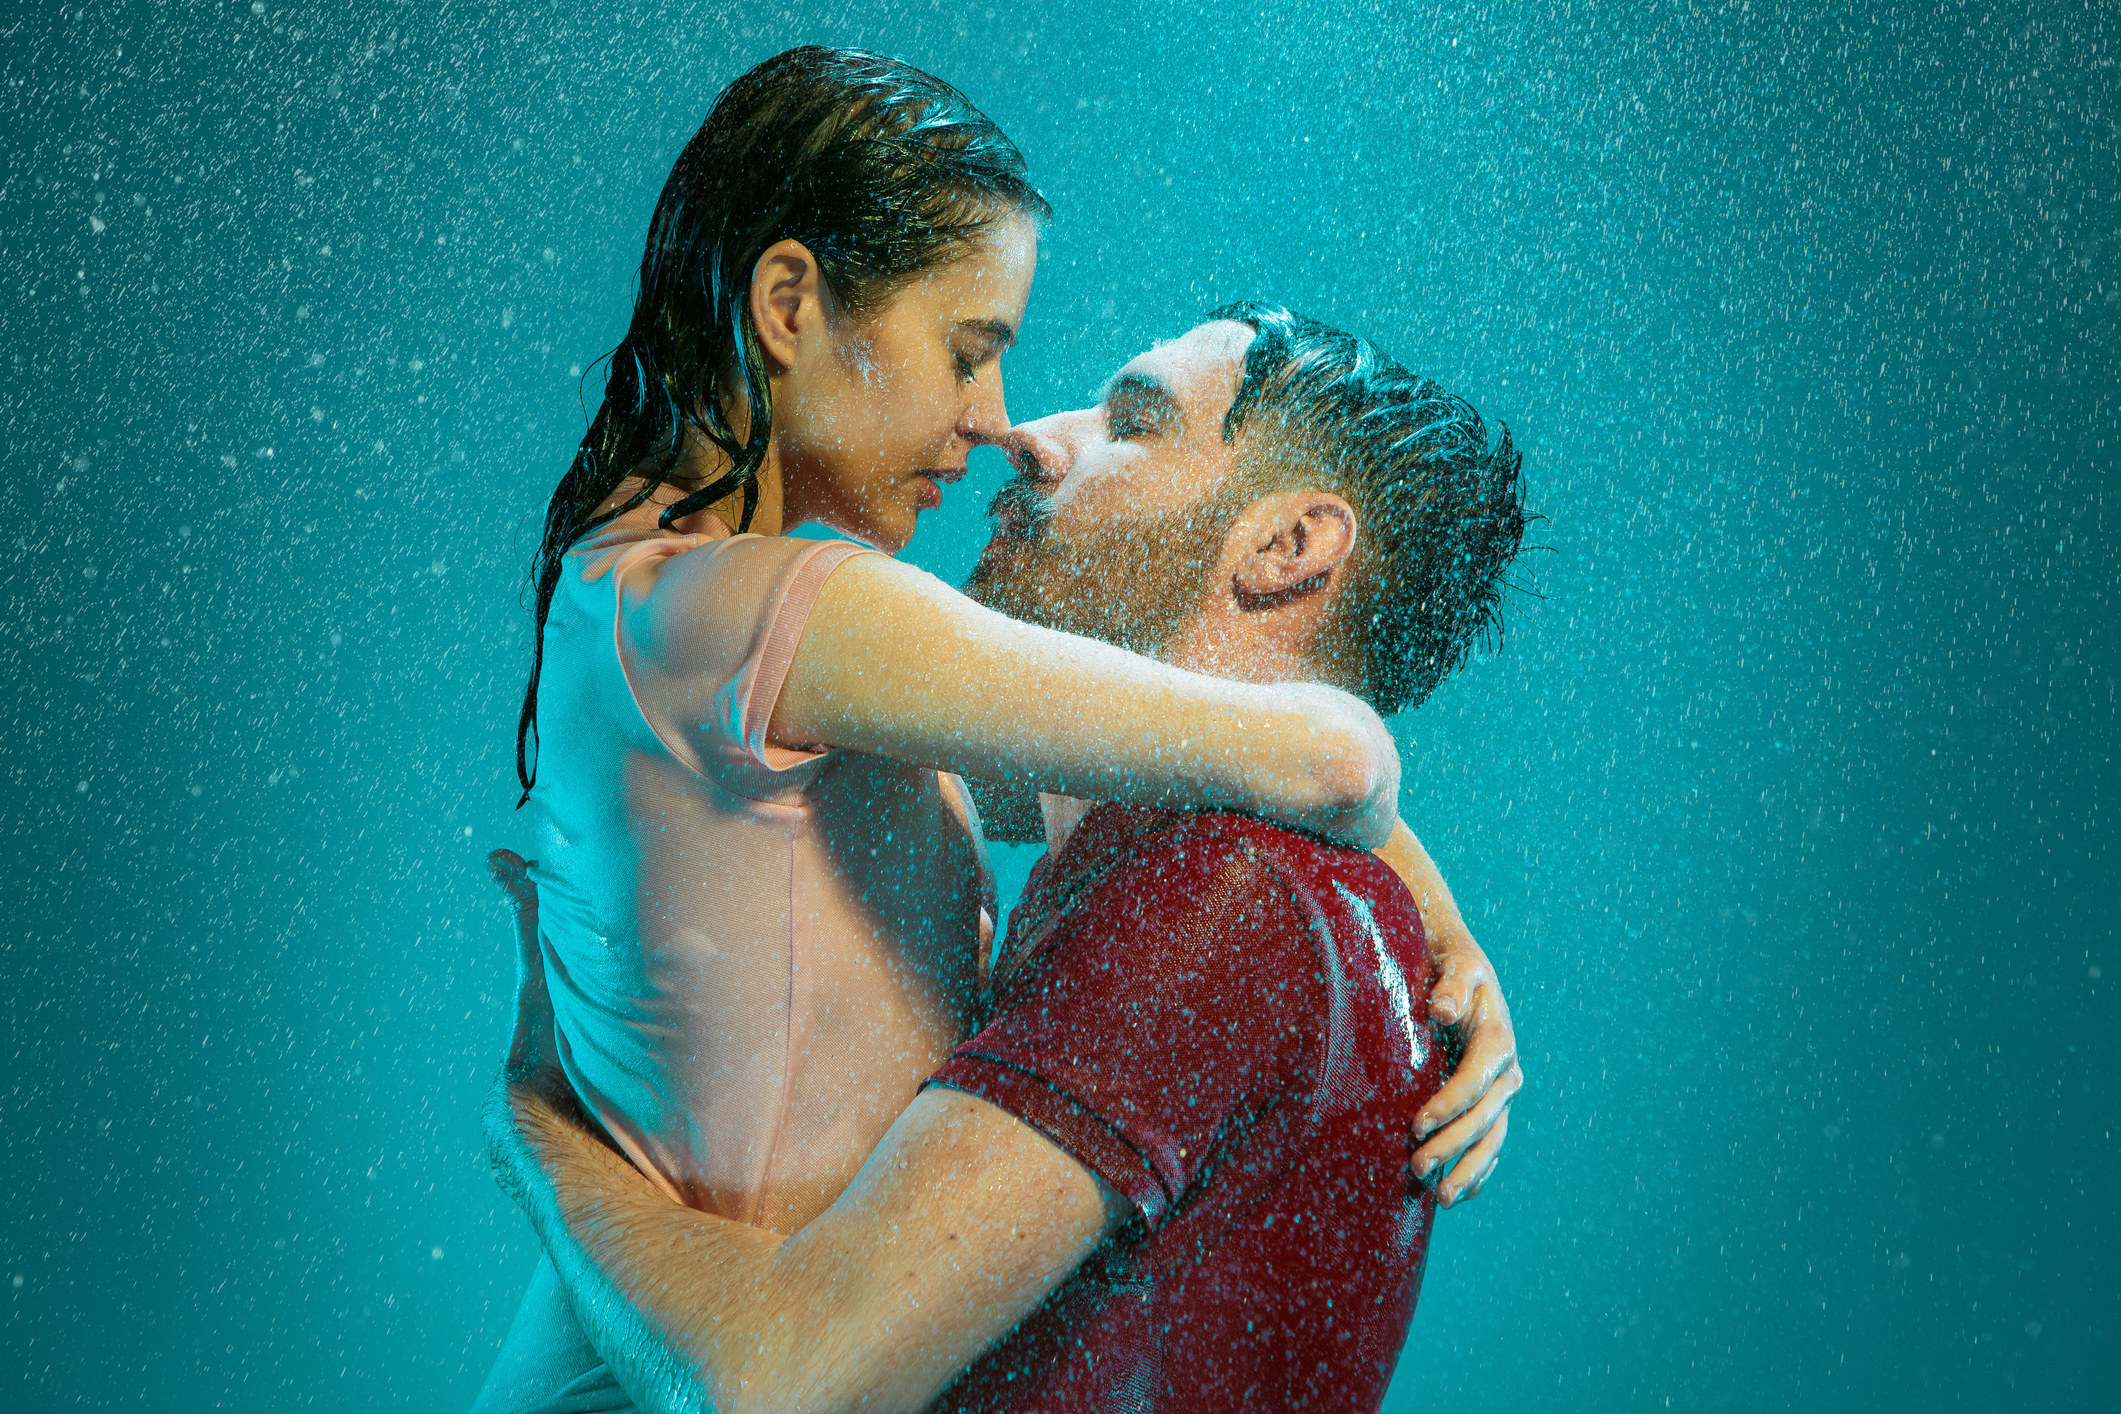 The loving couple kissing in the rain on a turquoise background